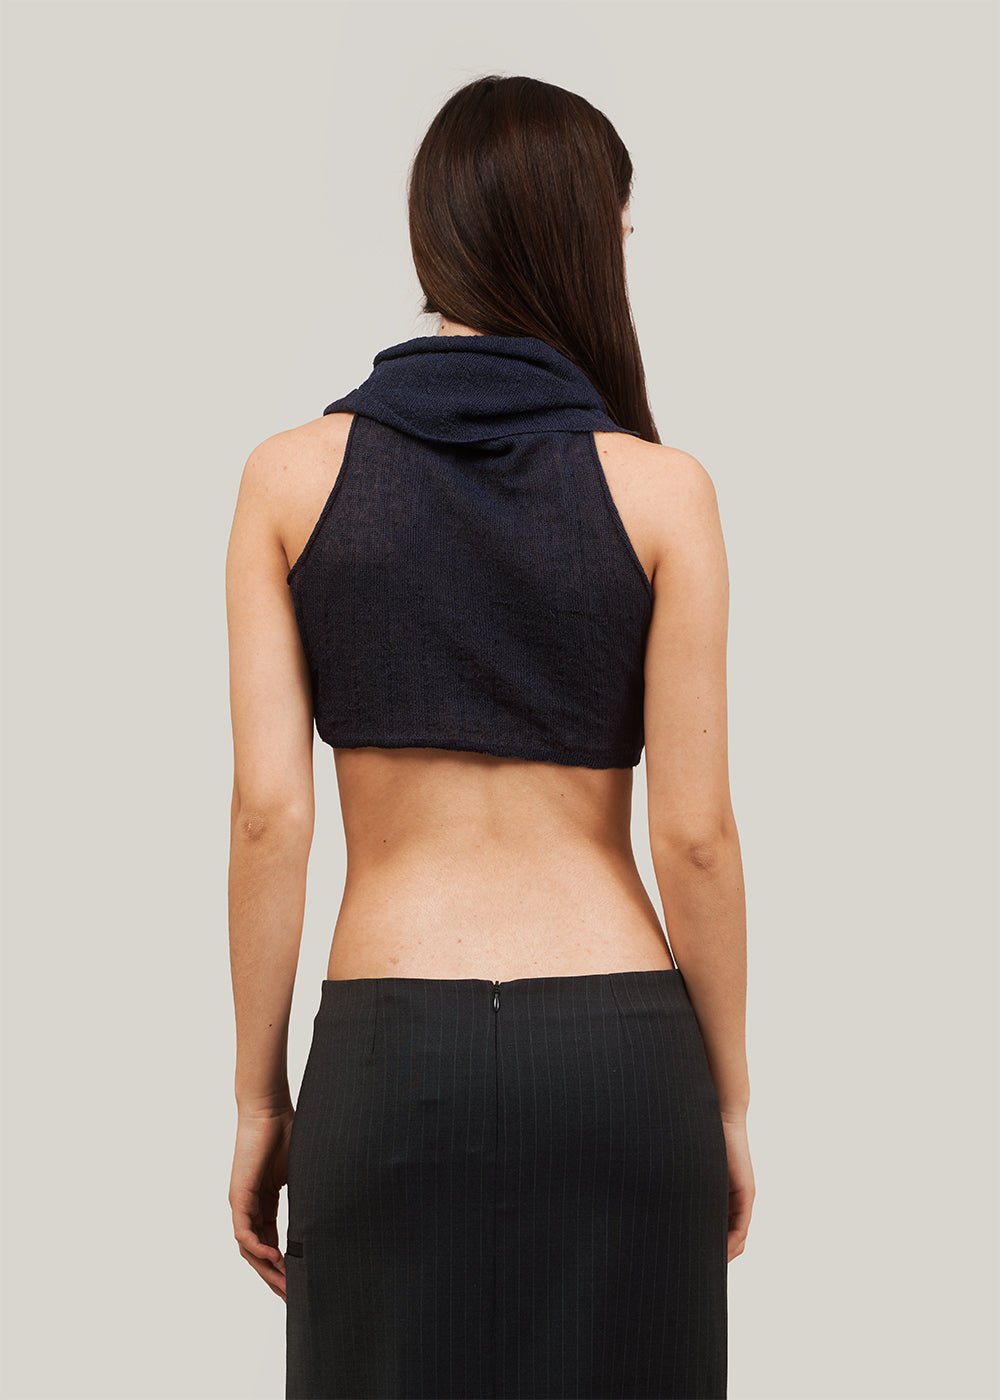 Paloma Wool Dark Navy Caril Top - New Classics Studios Sustainable Ethical Fashion Canada